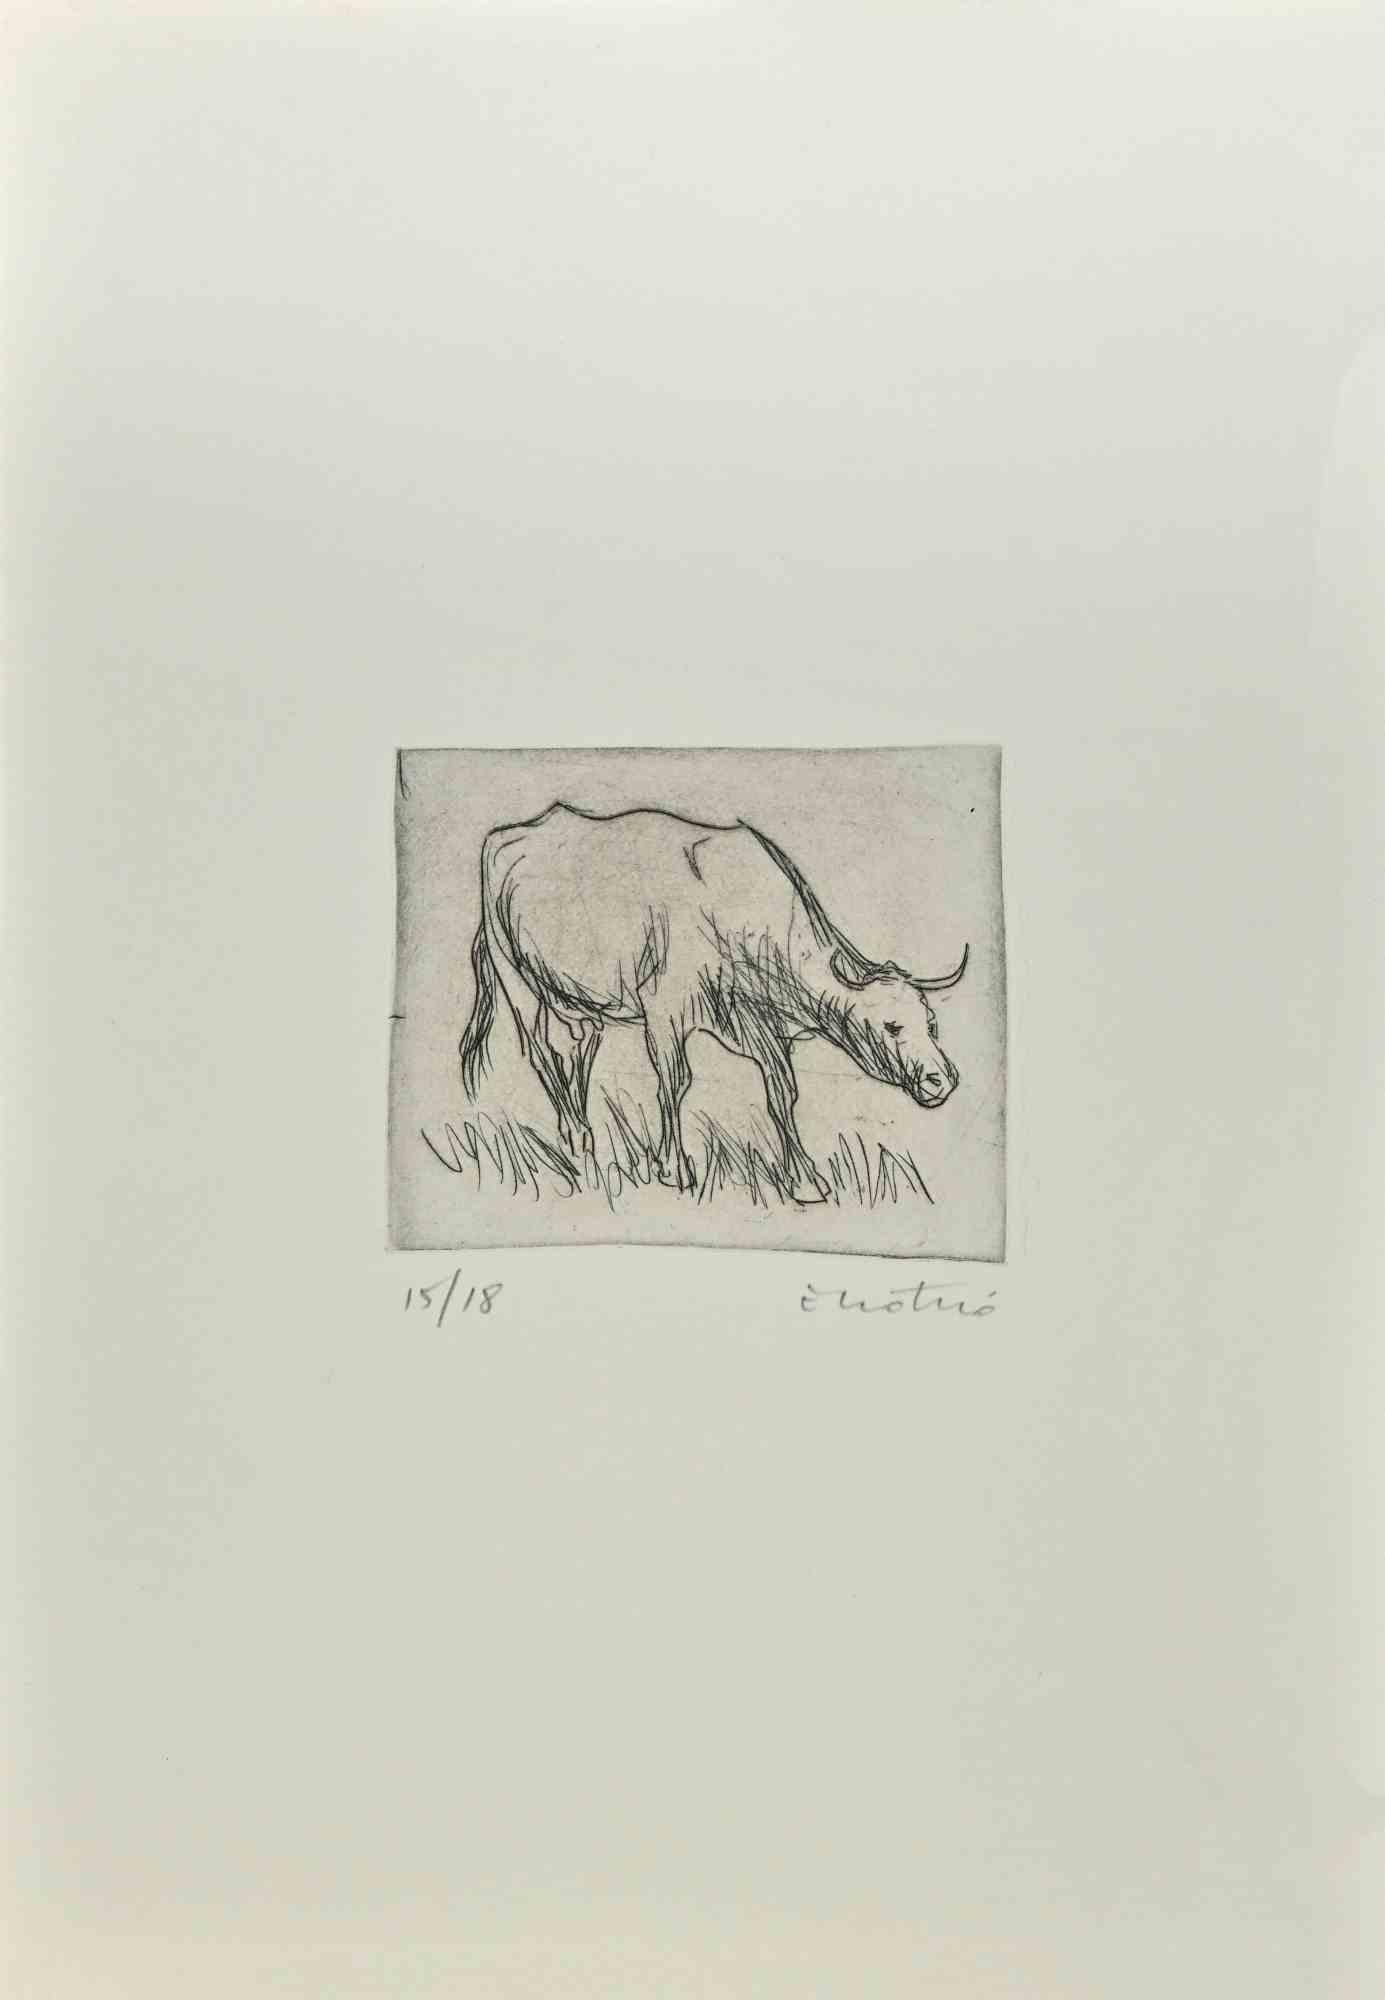 Bull is an Etching realized by Enotrio Pugliese in 1963.

Limited edition of 18 copies numbered and signed by the artist.

Good condition on a white cardboard.

Enotrio Pugliese (May 11, 1920 - August 1989) was an Italian painter. Born in Buenos